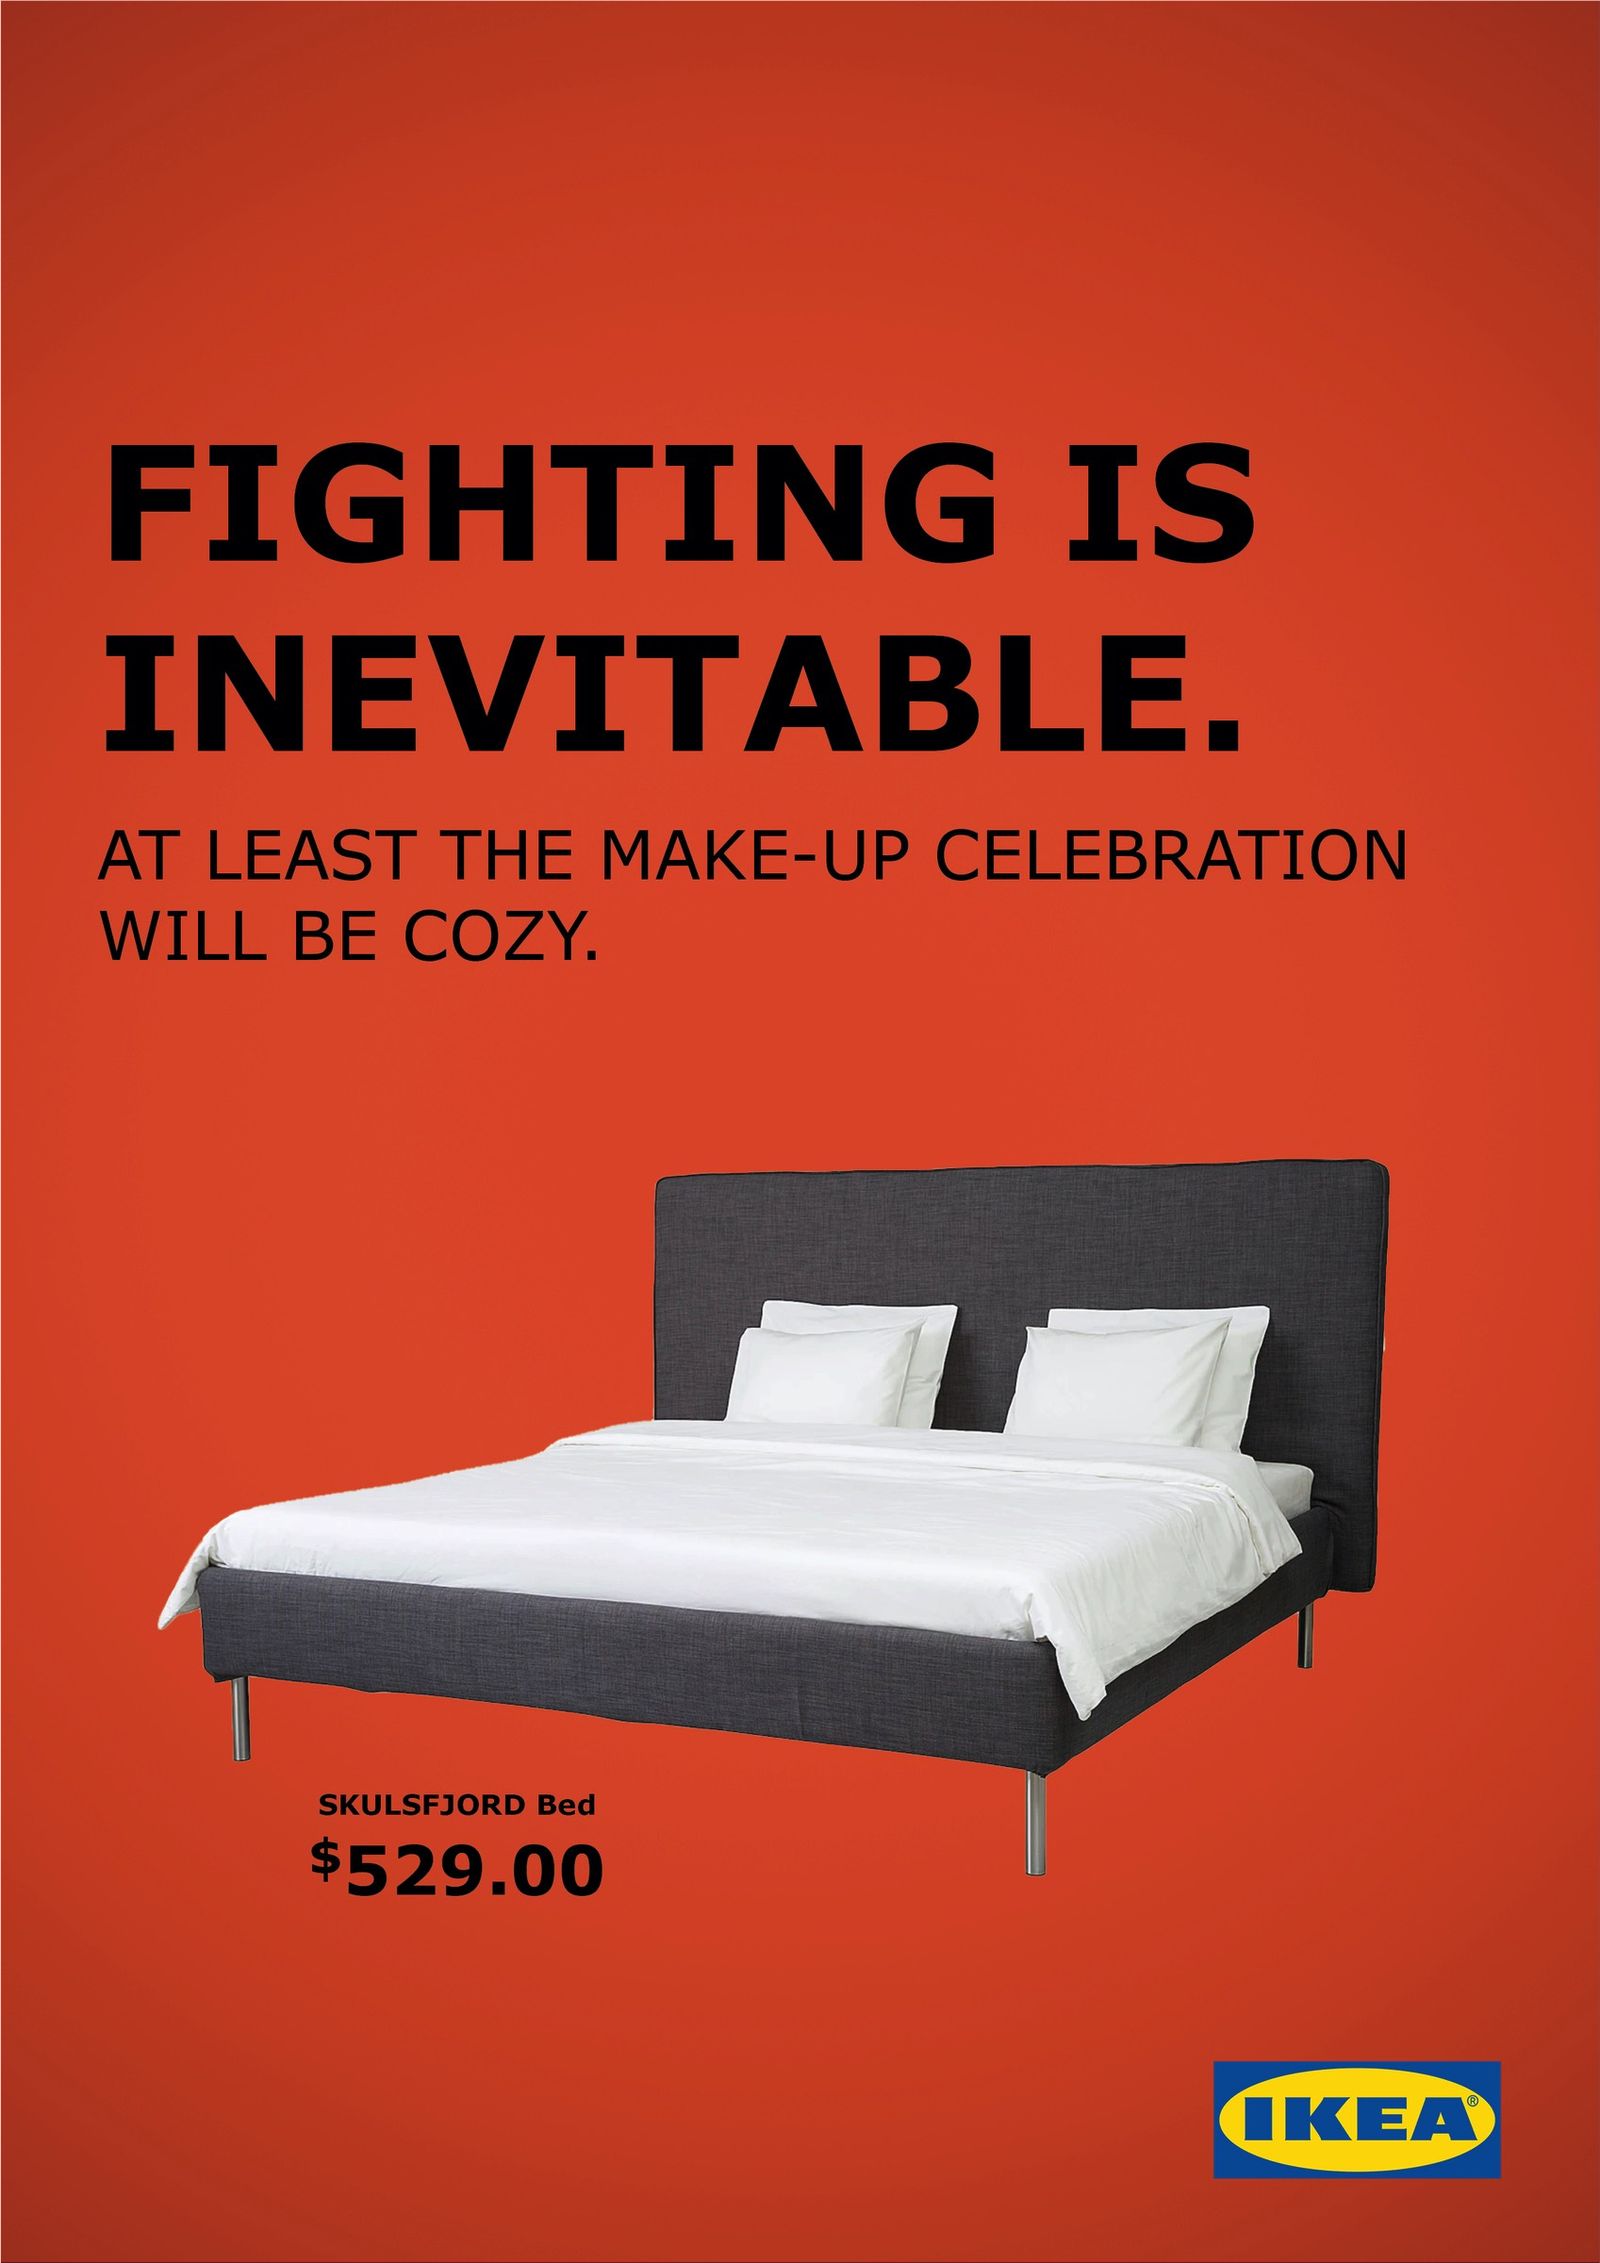 Ikea Fighting Is Inevitable By Miami, Skulsfjord Bed Frame